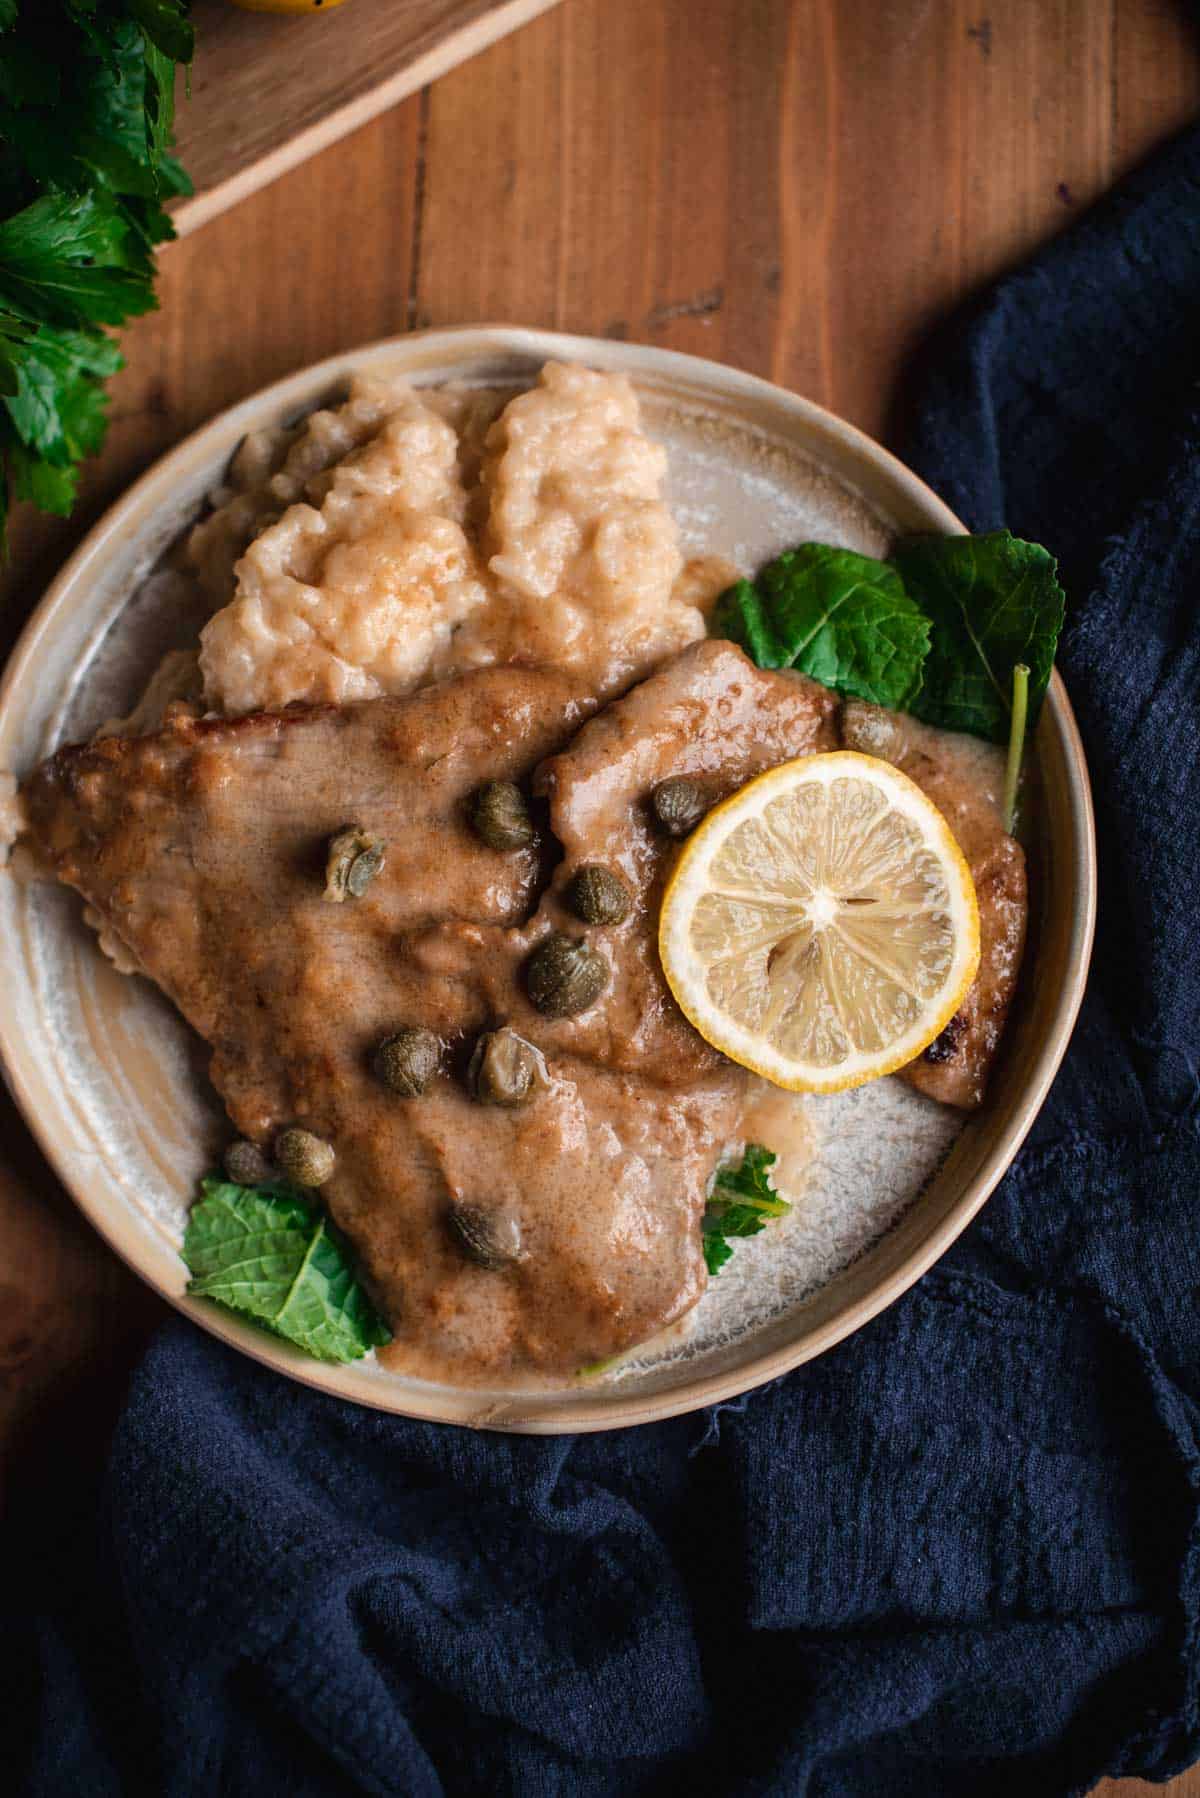 Veal Scallopini is placed on a cream colored ceramic plate, on a wooden table. The veal cutlets are coated in the buttery sauce and it is served with a side of parmesan risotto, some salad leaves and a lemon ring.